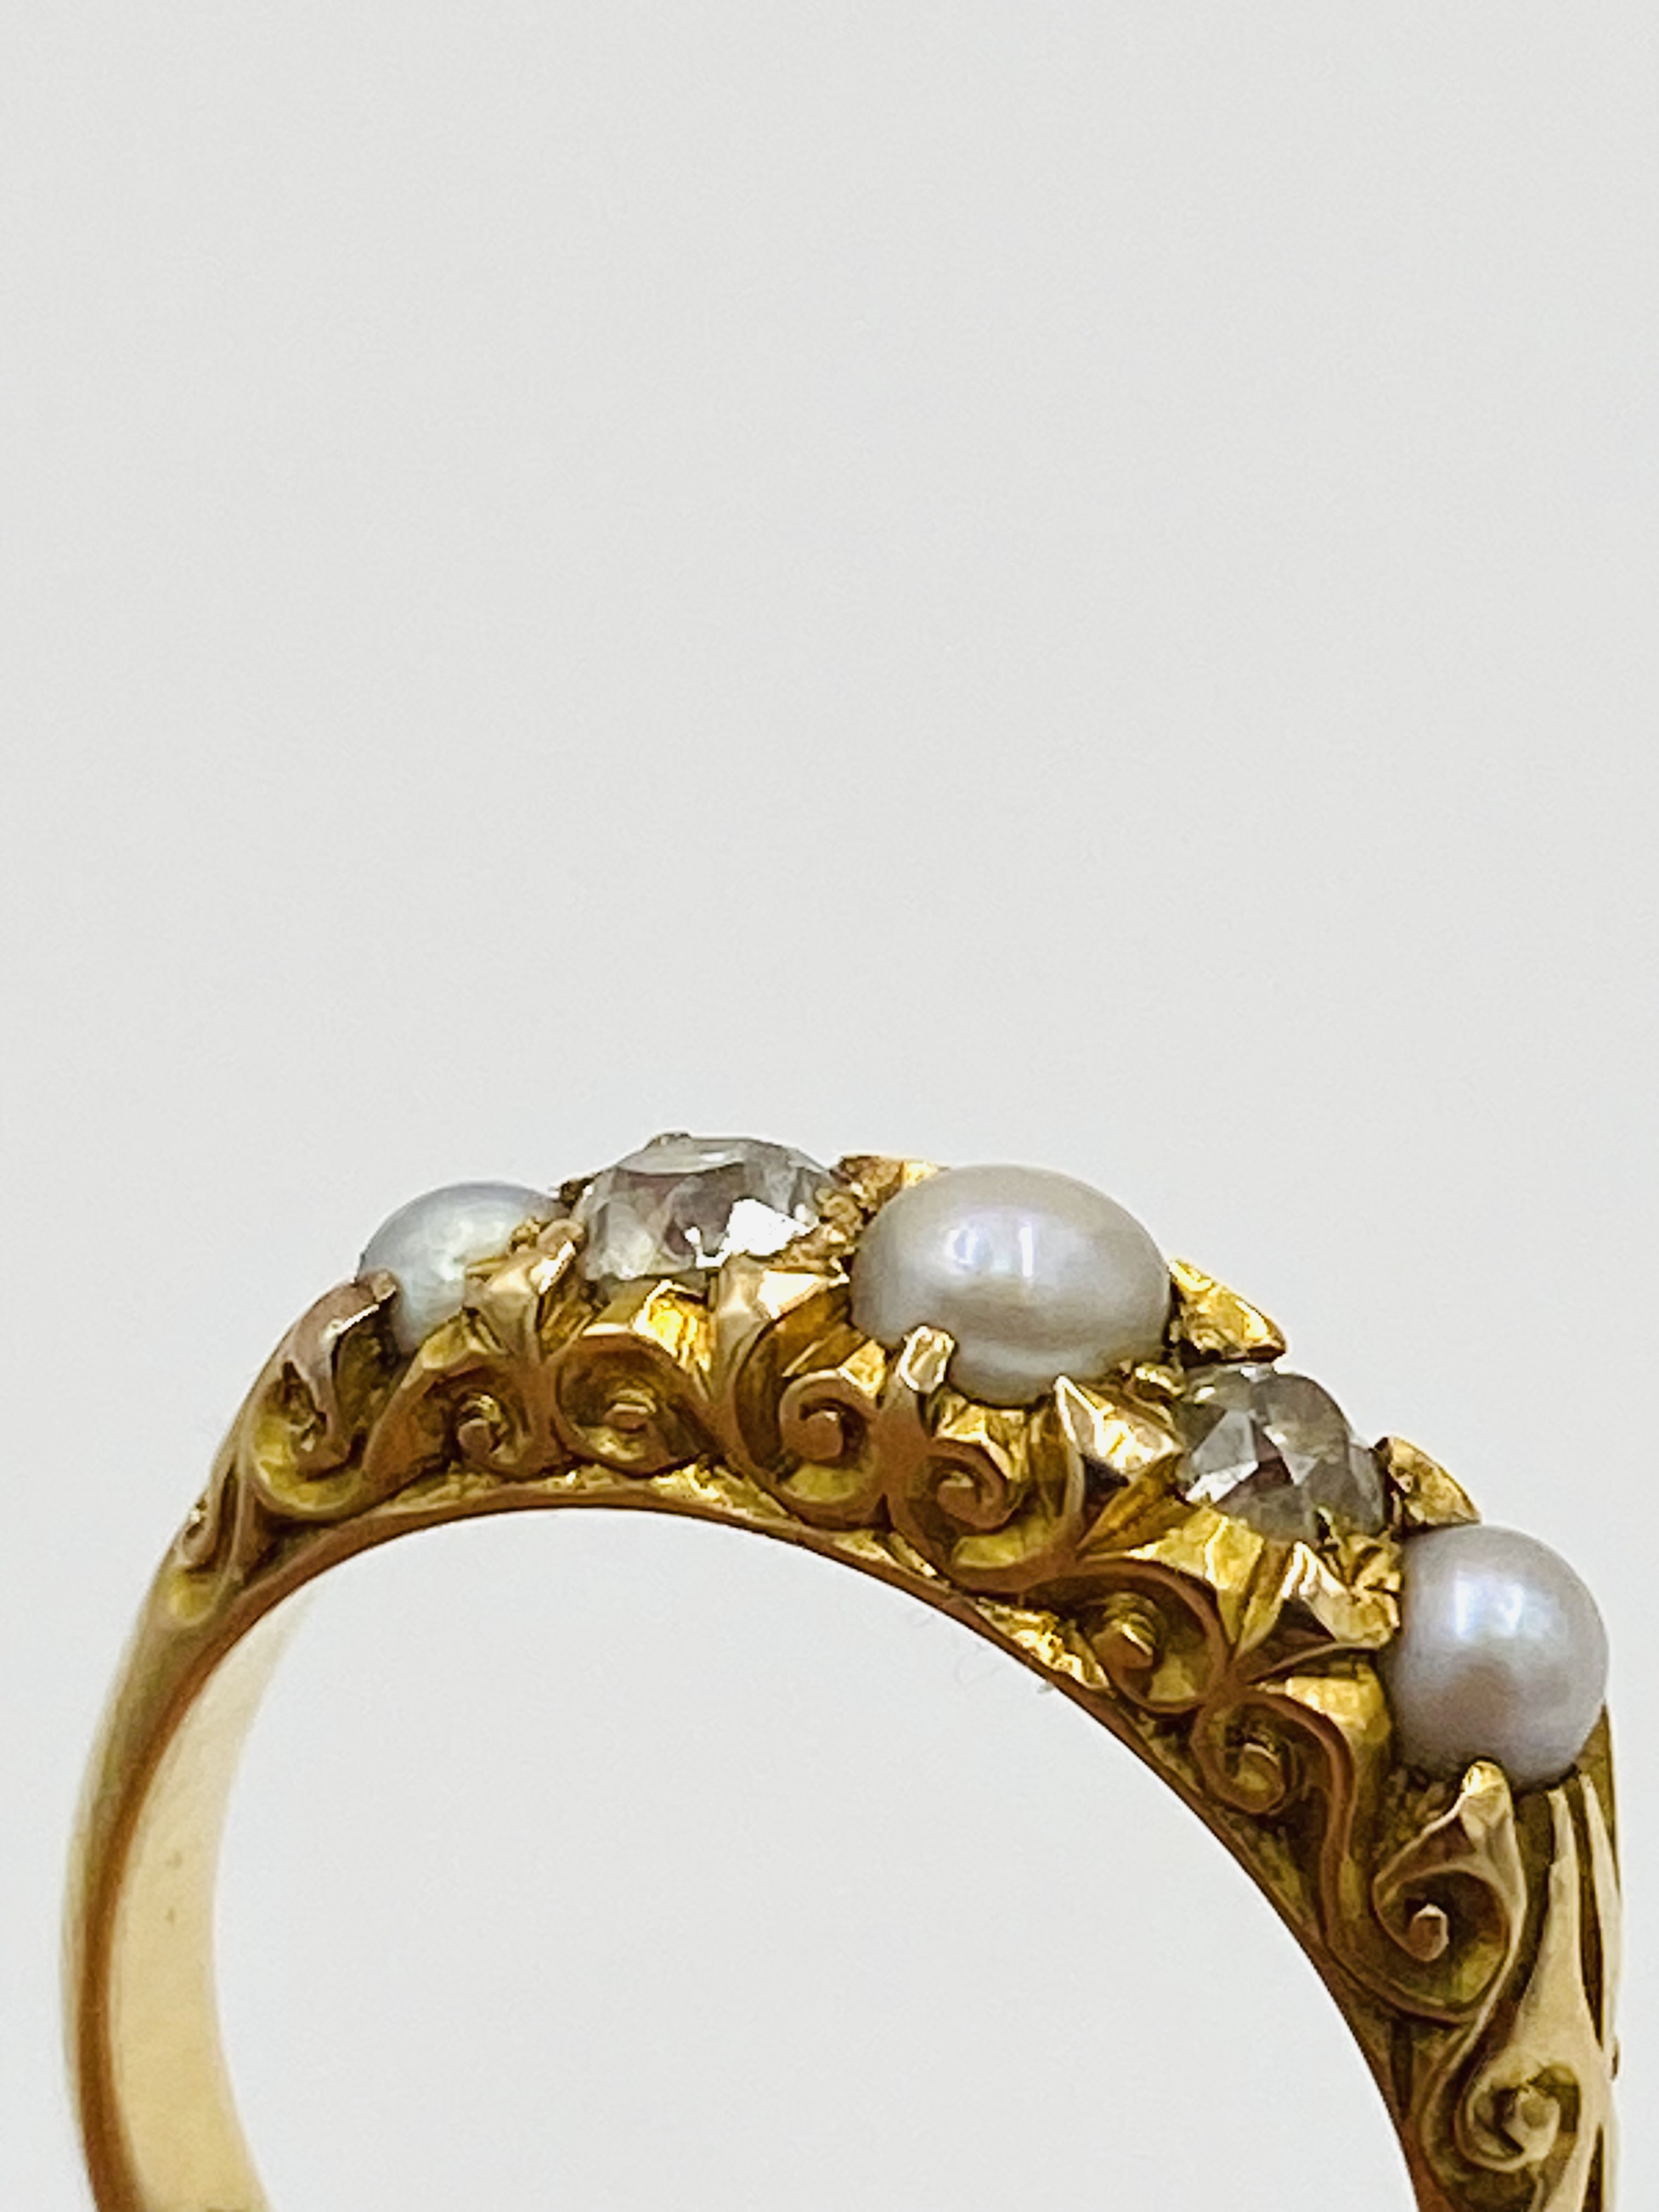 18ct gold ring with three seed pearls and two diamonds - Image 3 of 4